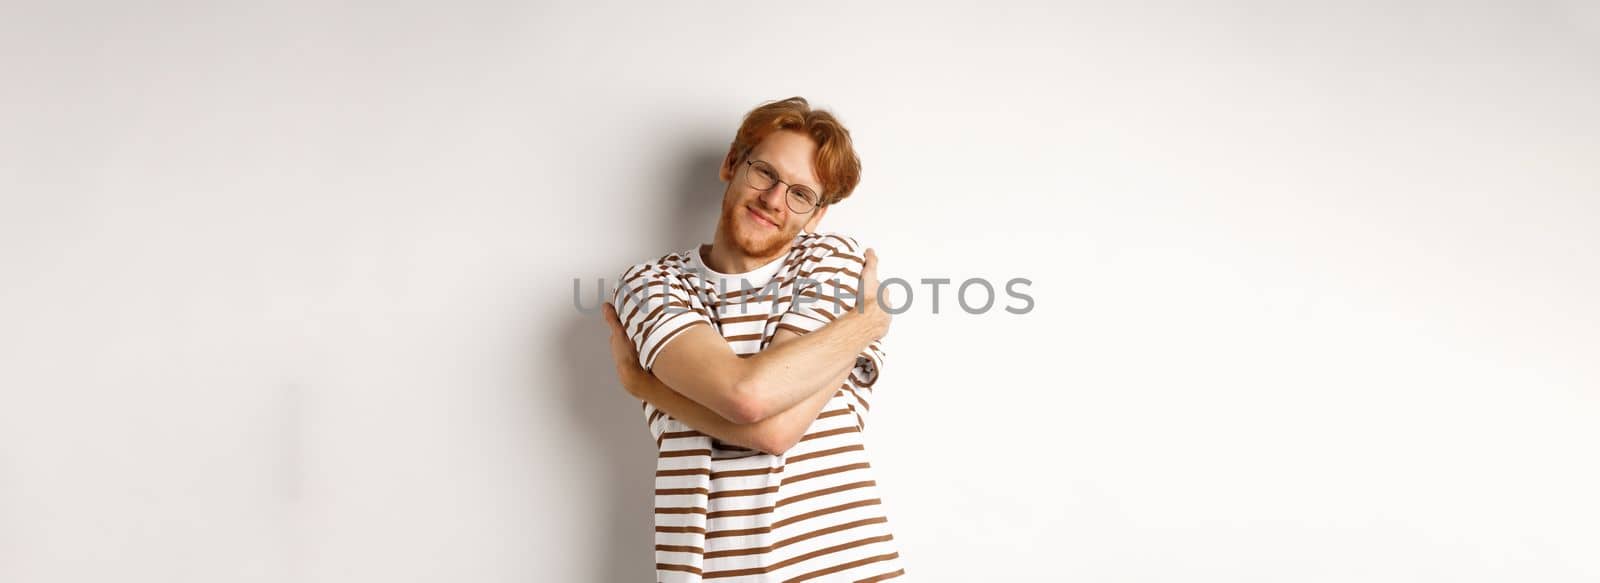 Handsome smiling man with red hair and beard looking relaxed, hugging himself and staring at camera happy face, white background.